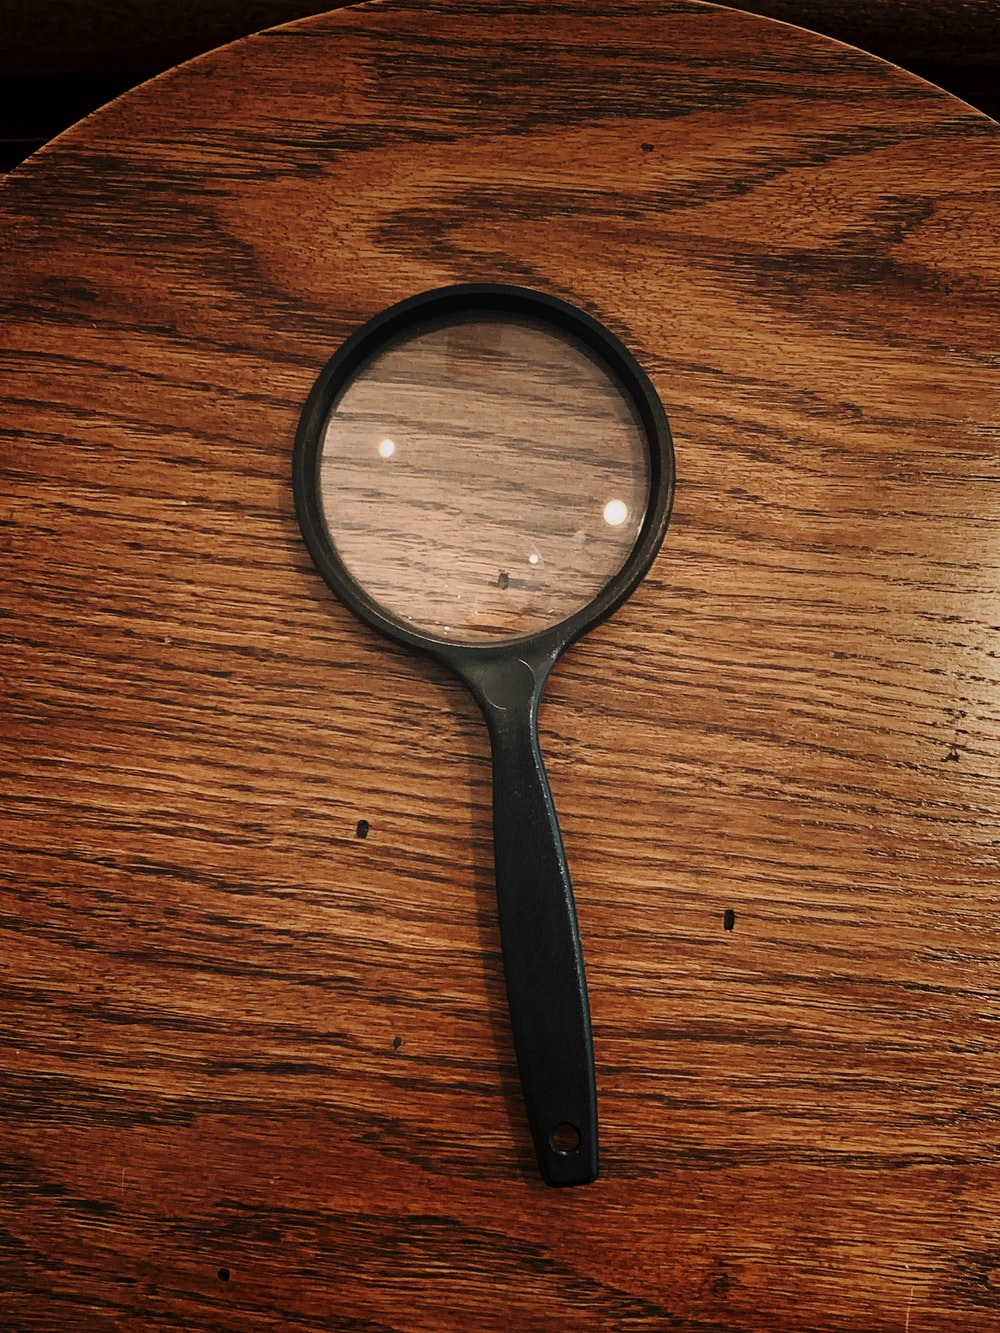  A magnifying glass